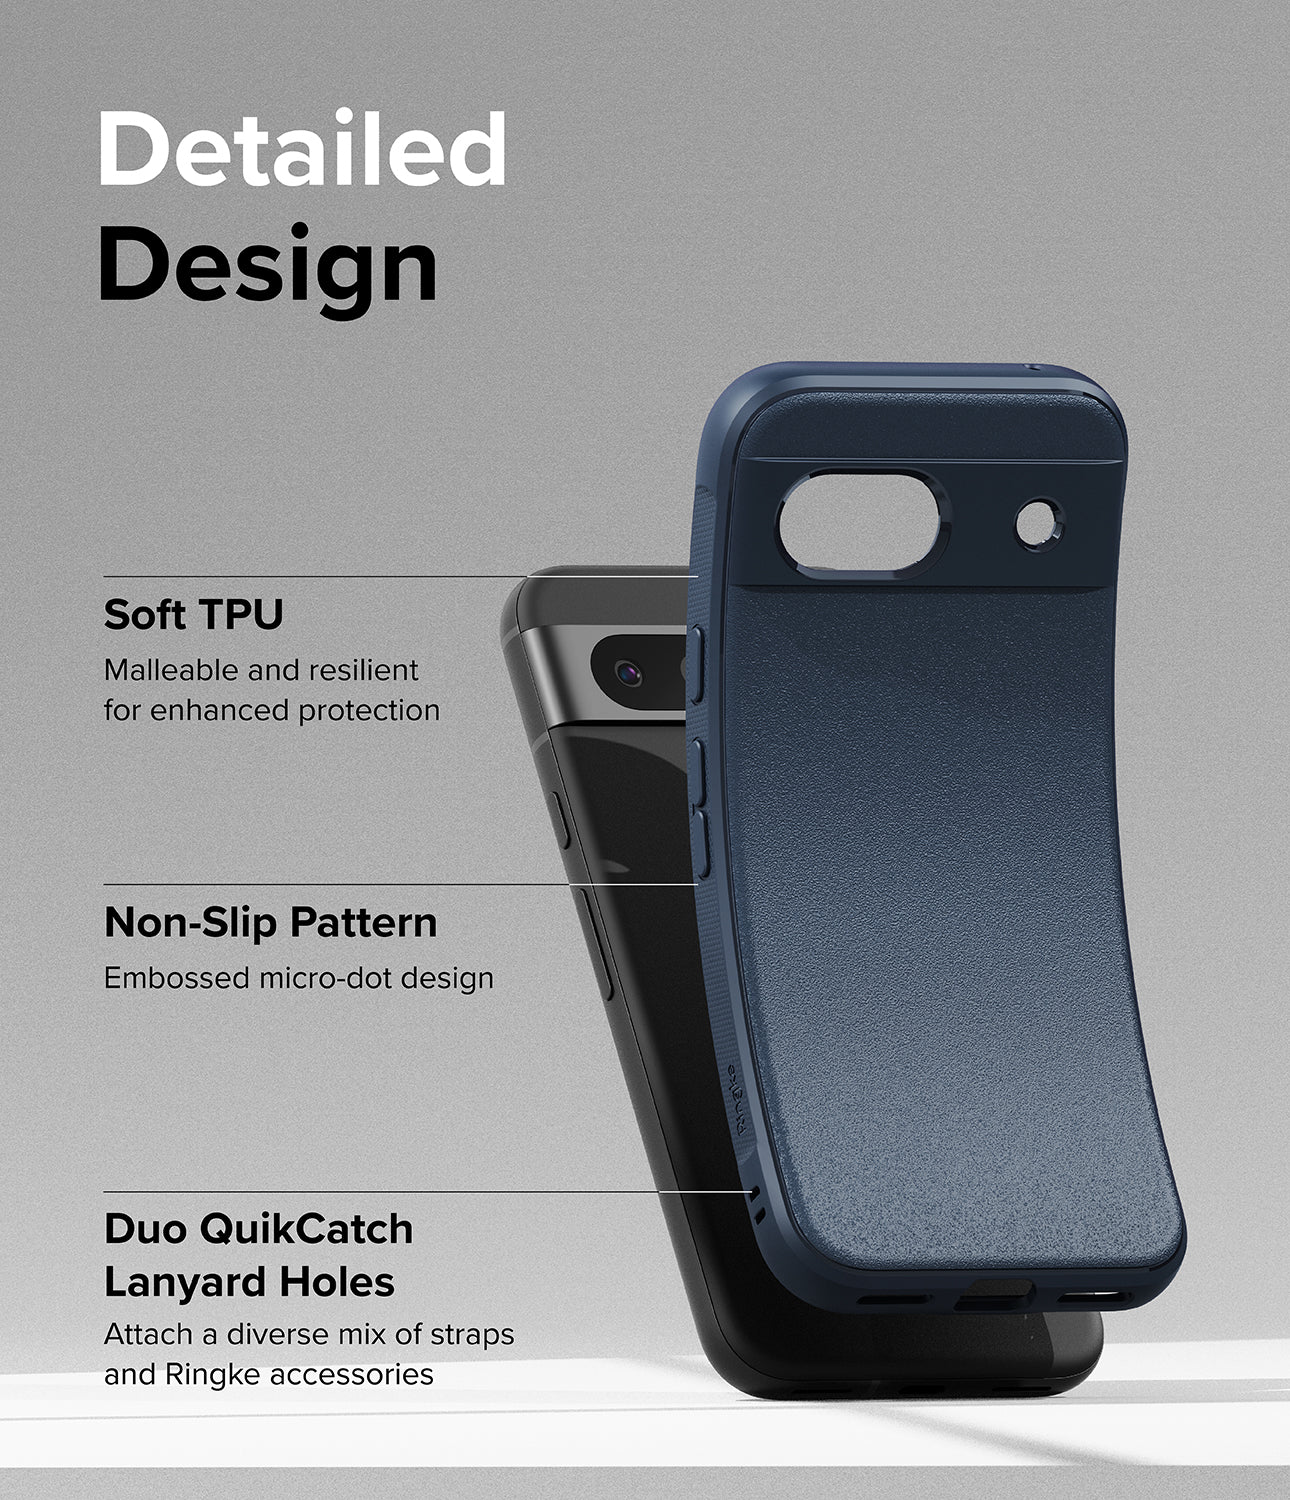 Google Pixel 8a Case | Onyx - Navy - Detailed Design. Malleable and resilient for enhanced protection with Soft TPU. Embossed micro-dot design with Non-Slip Pattern. Attach a diverse mix of straps and Ringke accessories with Duo QuikCatch Lanyard Holes.